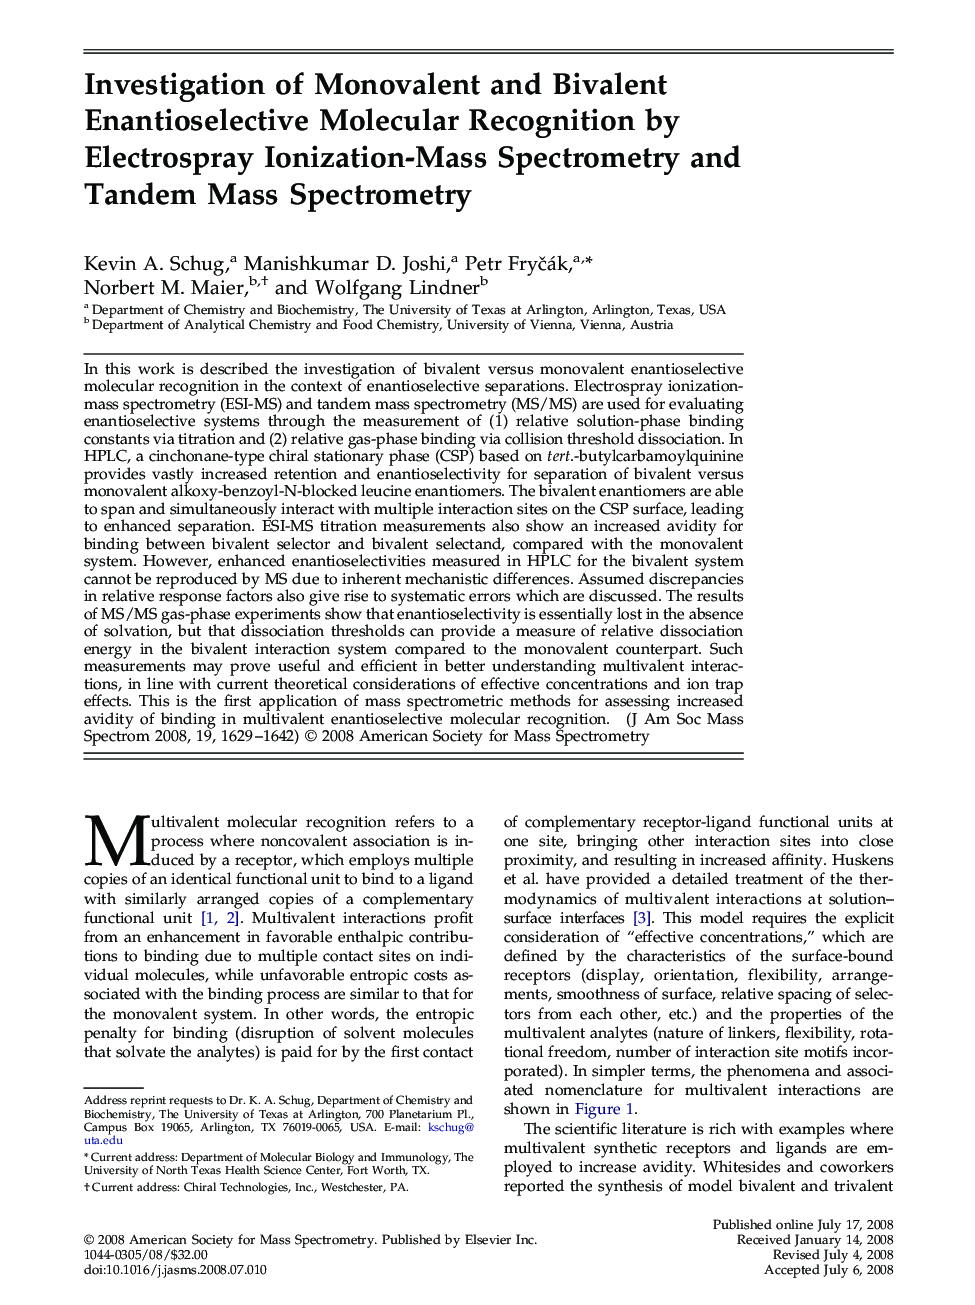 Investigation of Monovalent and Bivalent Enantioselective Molecular Recognition by Electrospray Ionization-Mass Spectrometry and Tandem Mass Spectrometry 